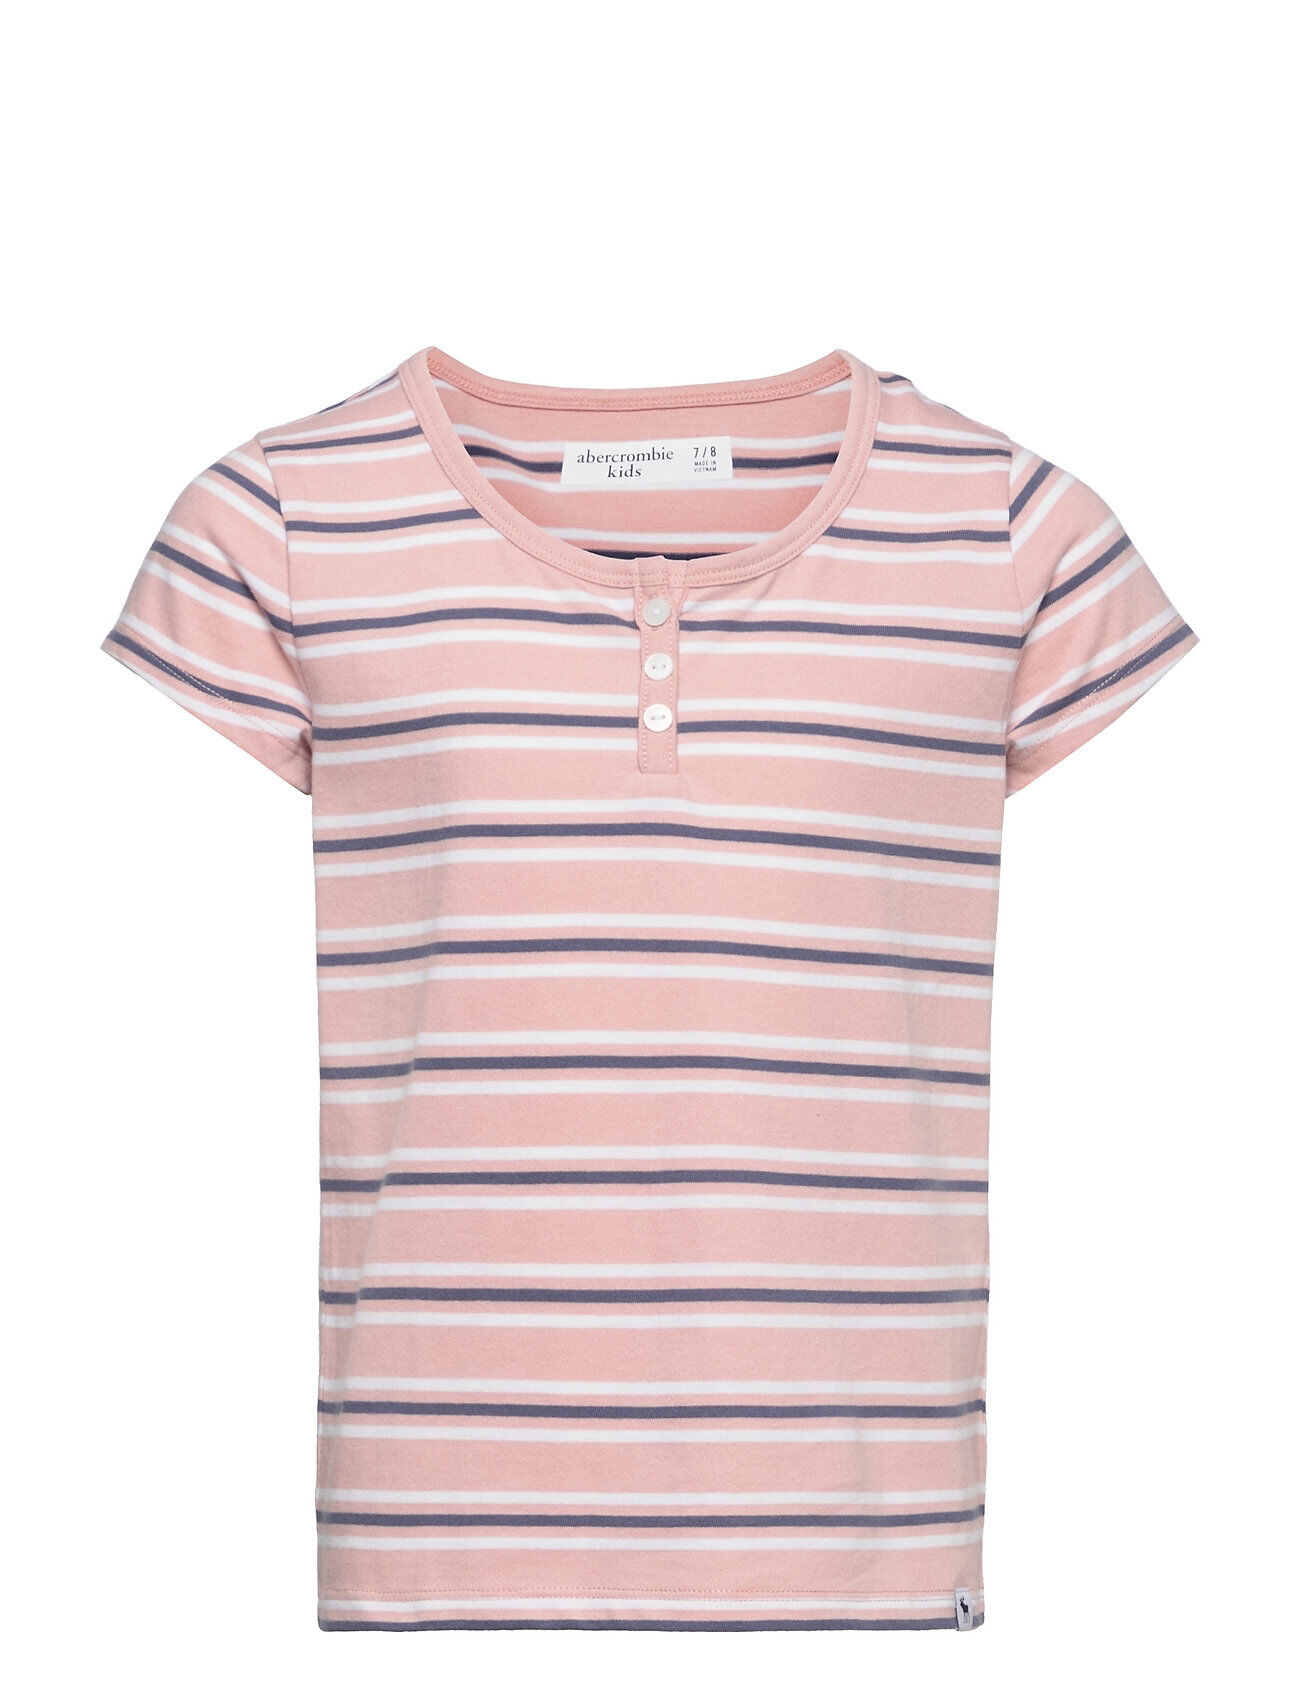 Abercrombie & Fitch Kids Girls Knits T-shirts Short-sleeved Multi/mønstret Abercrombie & Fitch